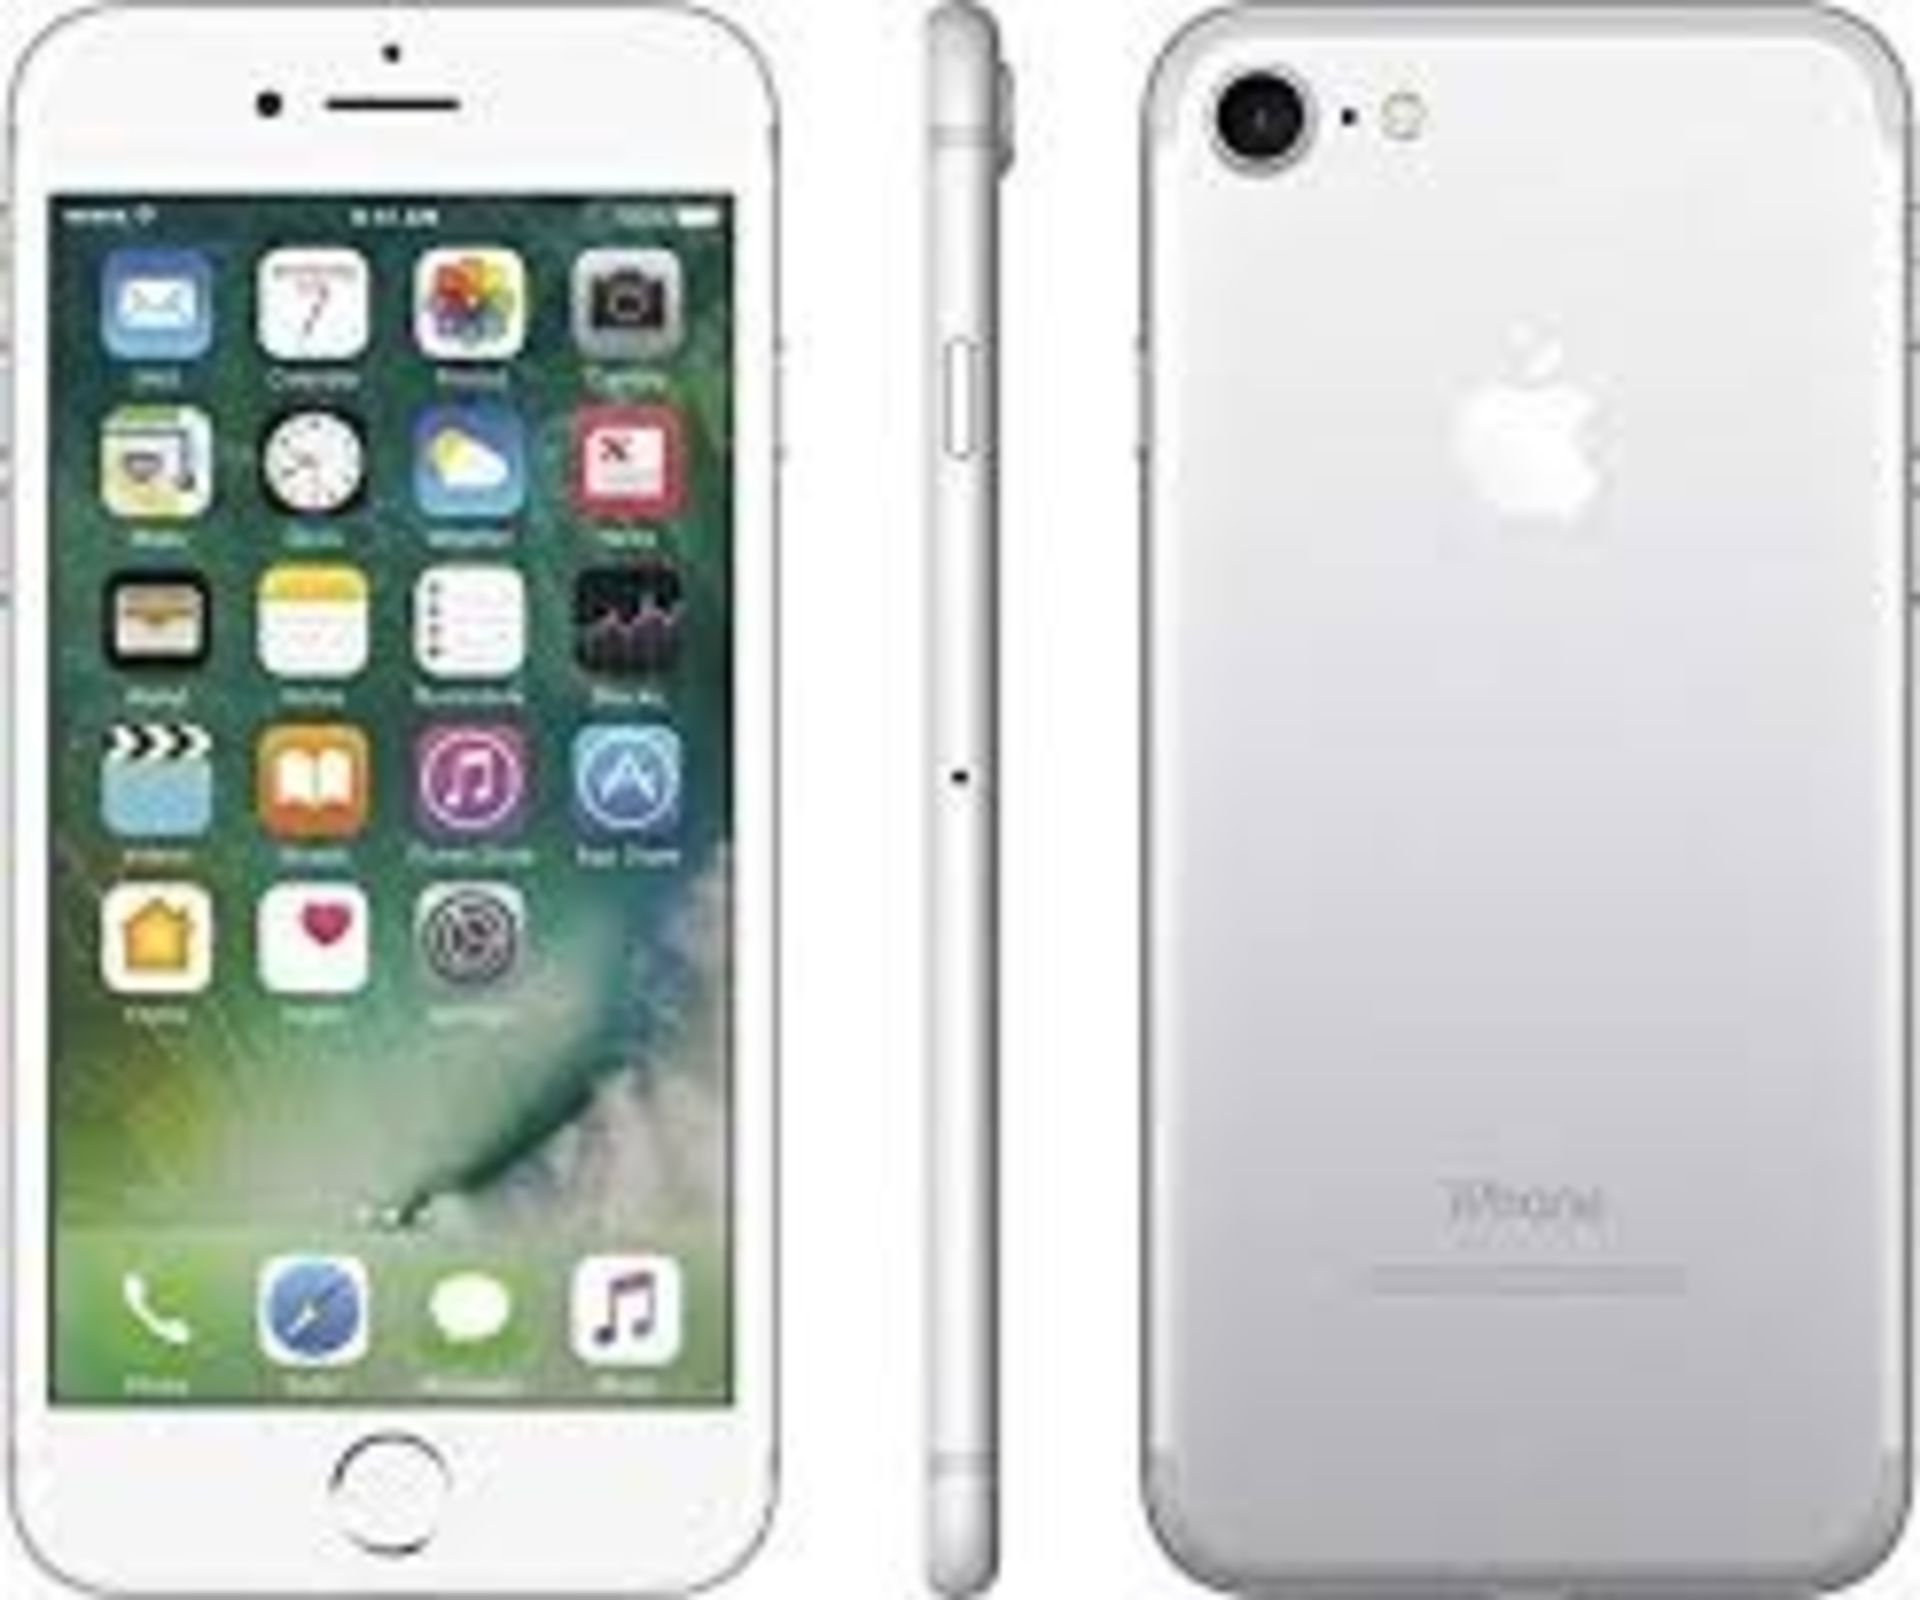 Apple iPhone 7 128GB Silver Grade A - Perfect Working Condition RRP £429 (Fully refurbished and